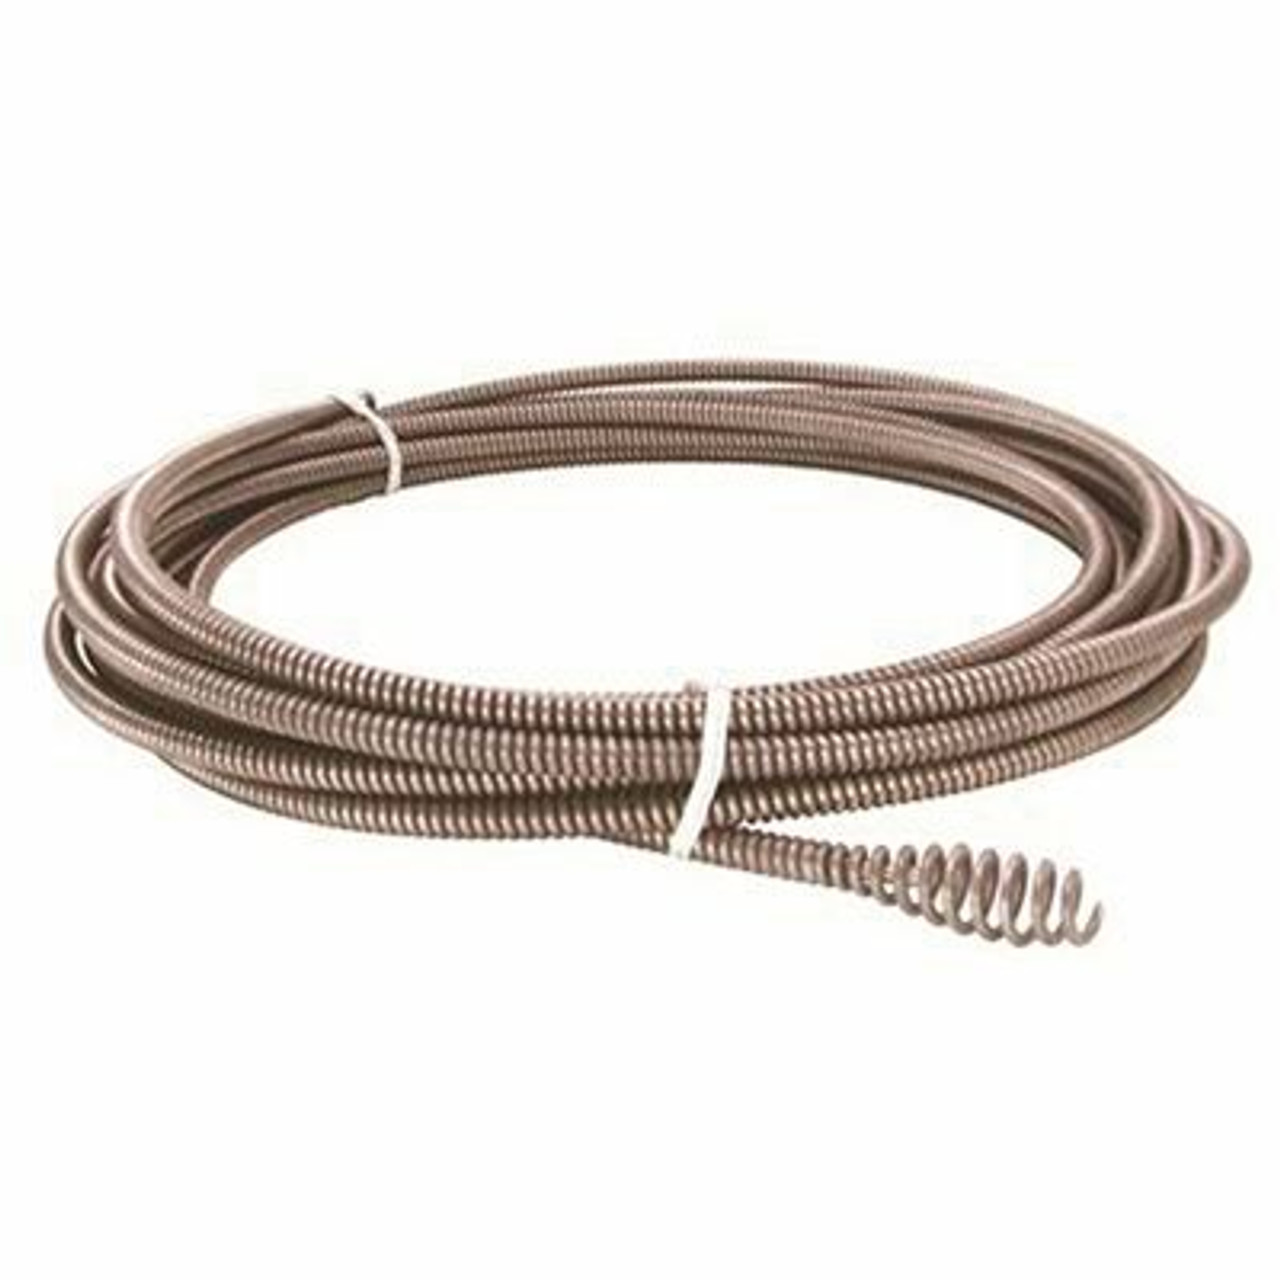 Ridgid 5/16 In. X 25 Ft. Replacement Cable For K-39 Drain Guns